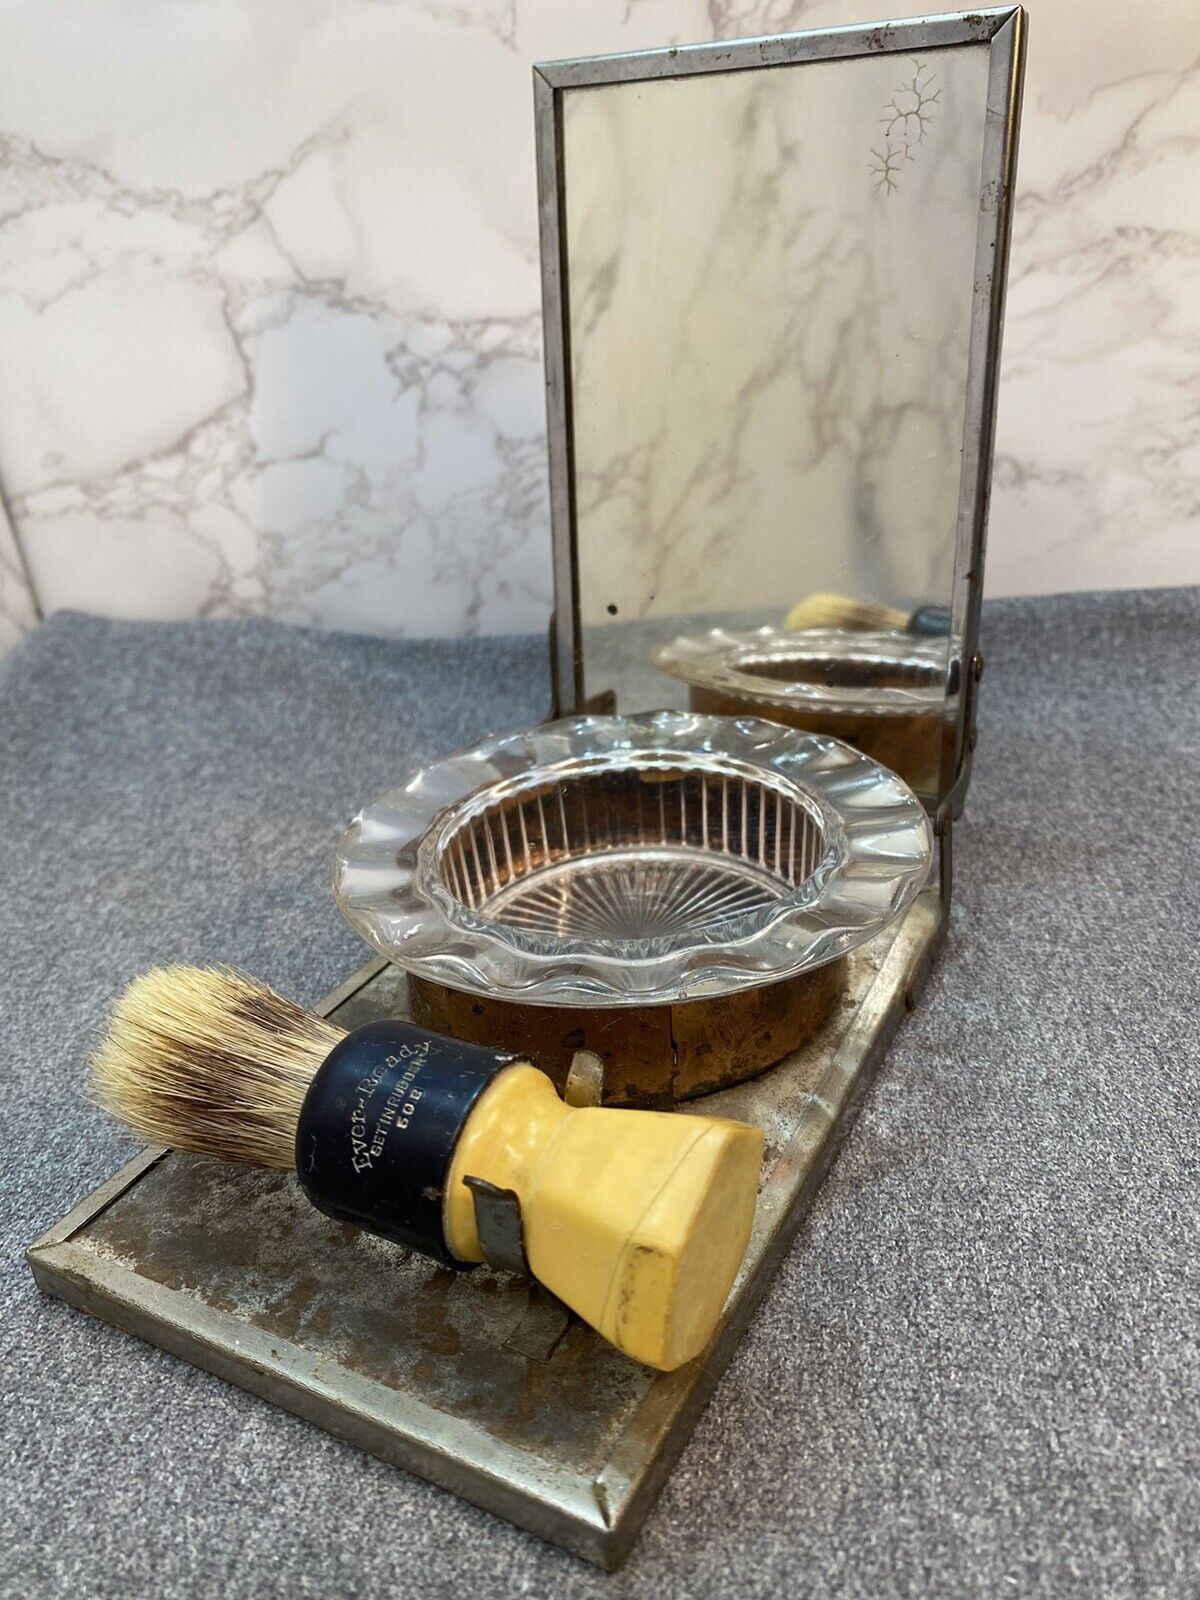 Antique Folding Travel Shaving Set with Mirror, Bowl, and Brush